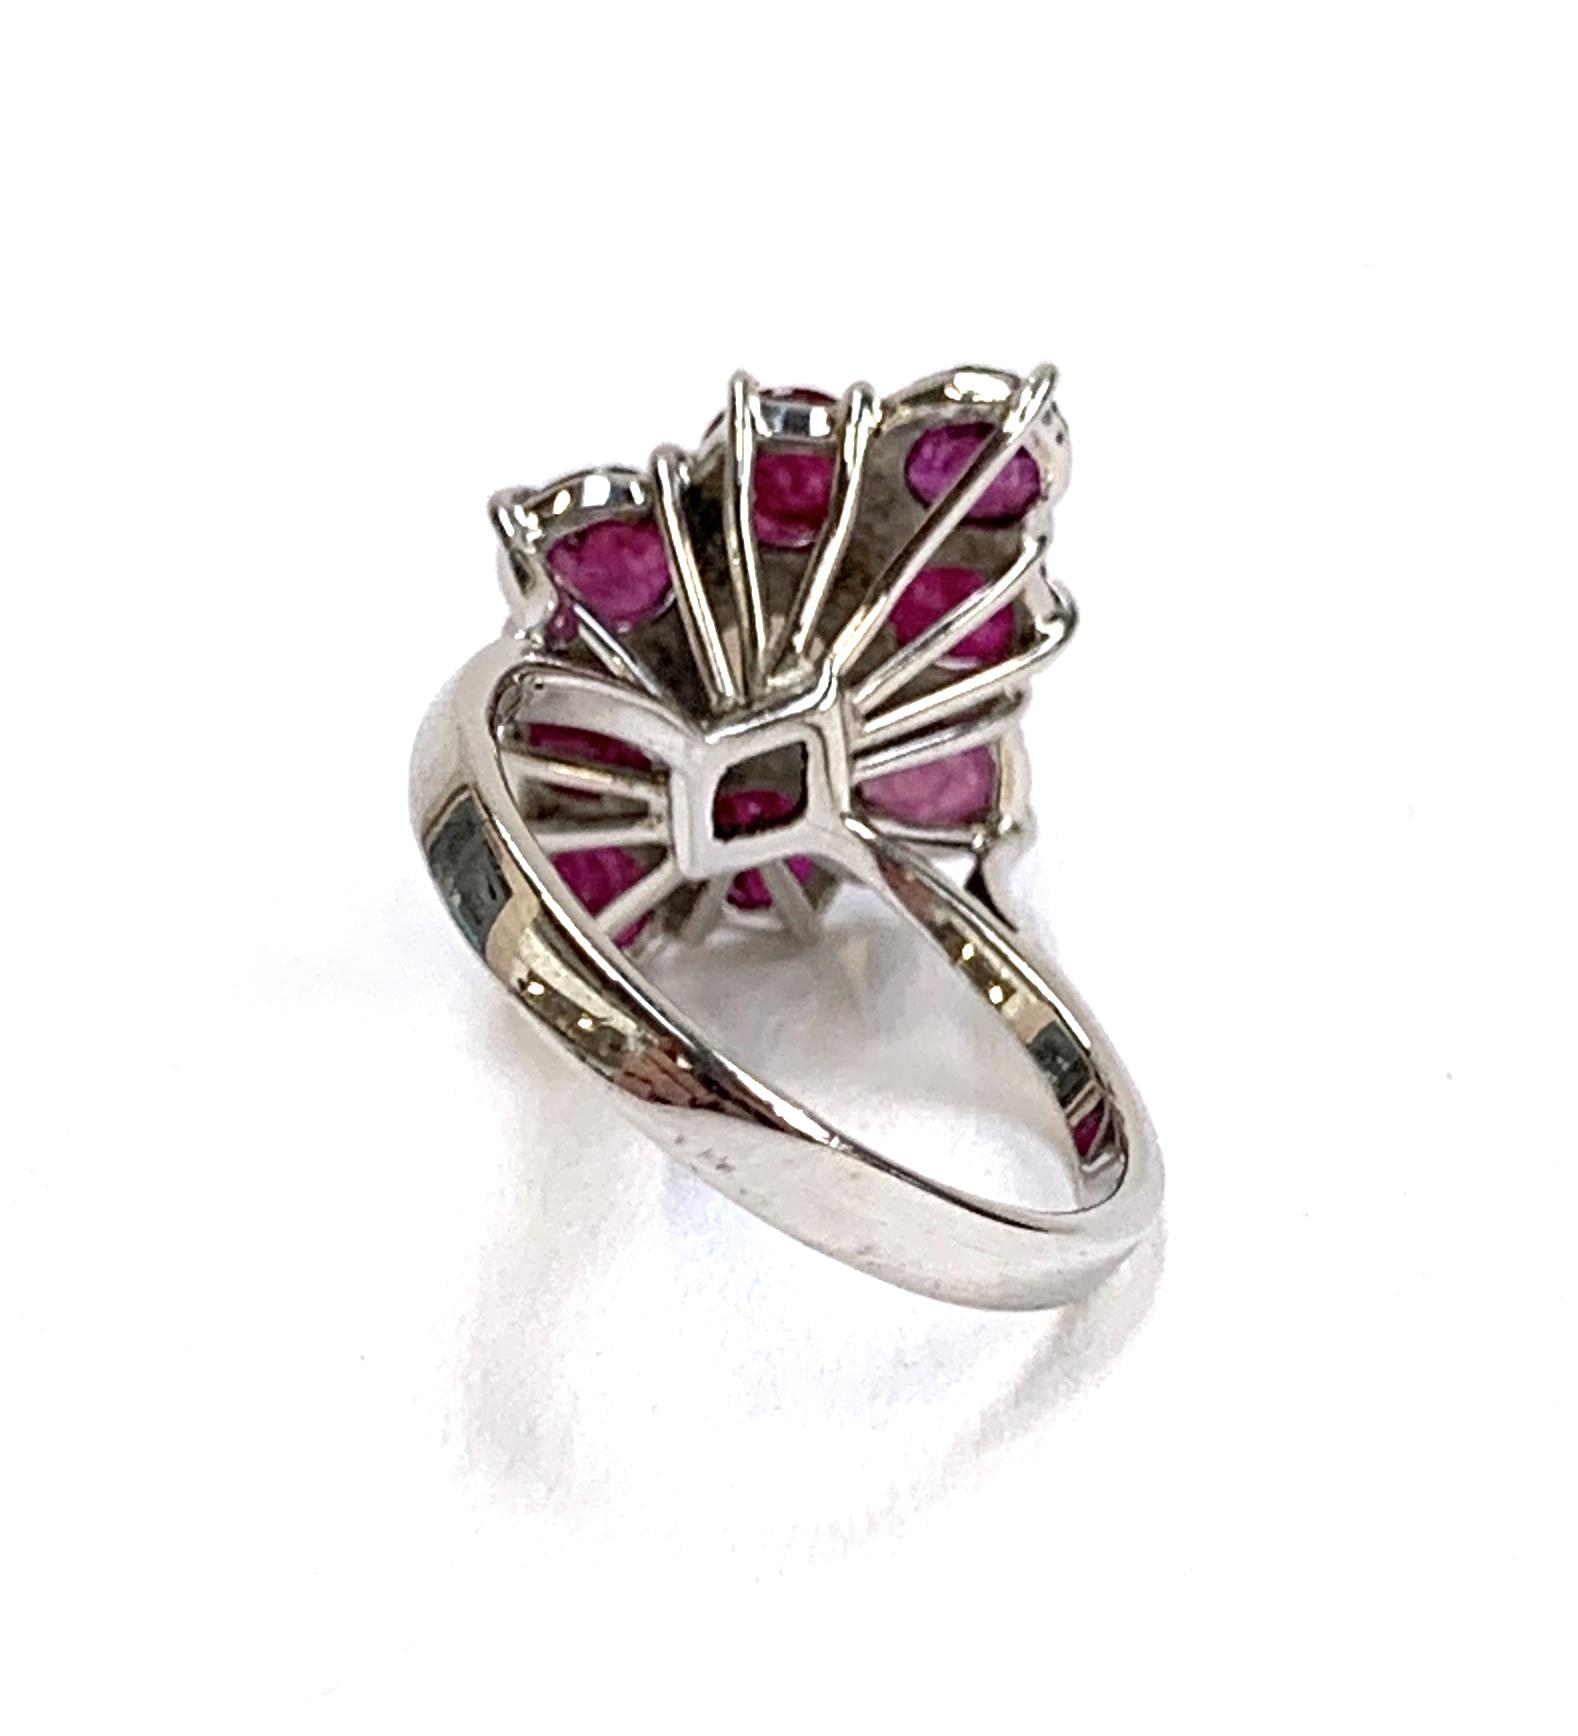 A 9ct white gold ring set with a navette form cluster of rubies and a central opal, size J, 3.2g - Image 3 of 3